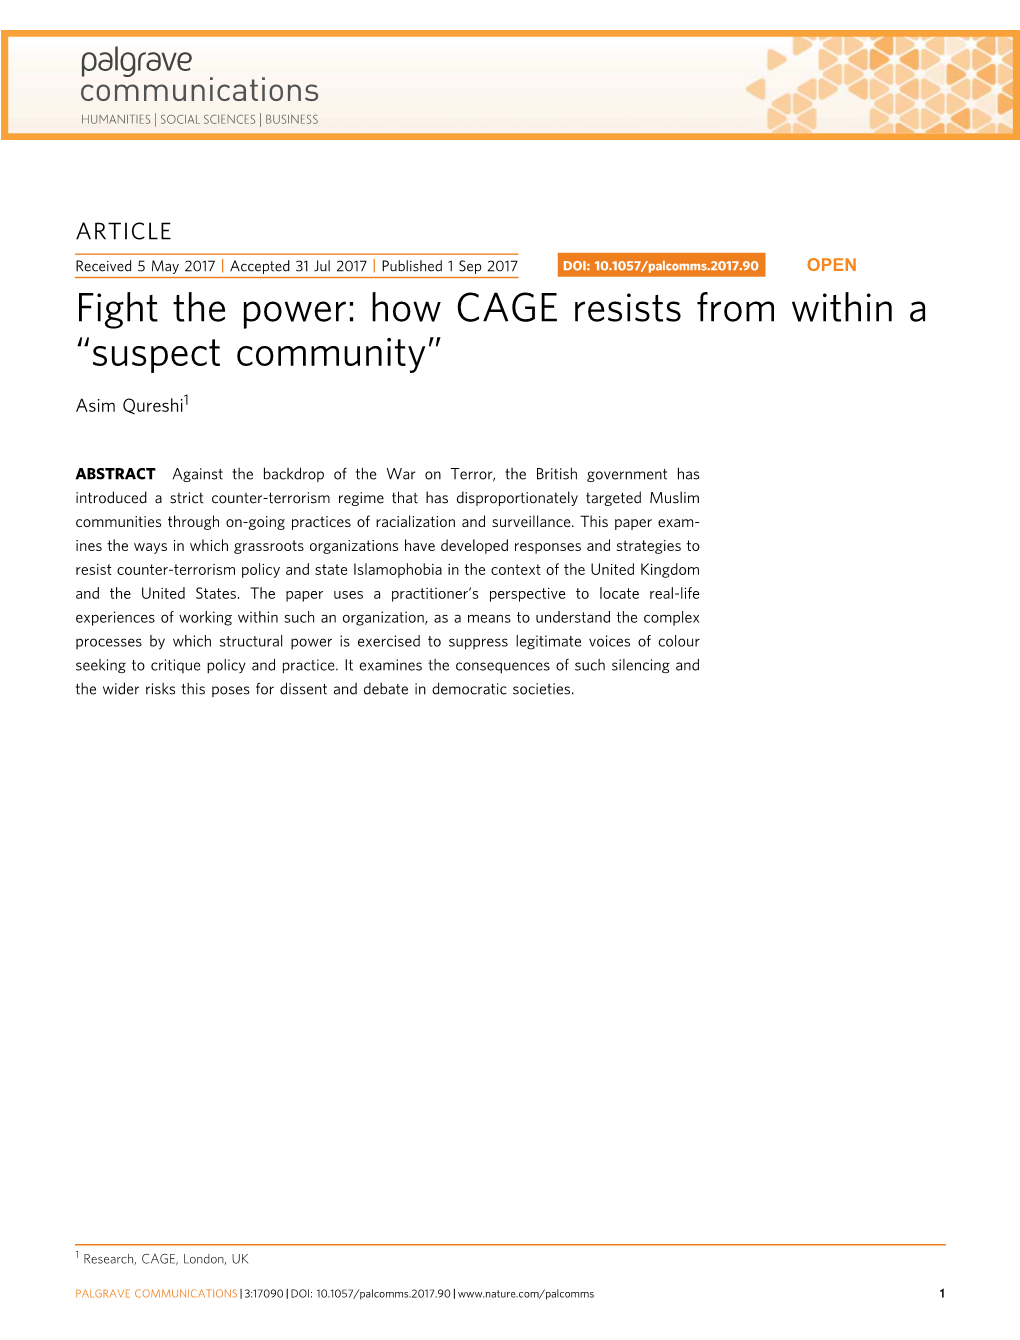 Fight the Power: How CAGE Resists from Within a “Suspect Community”